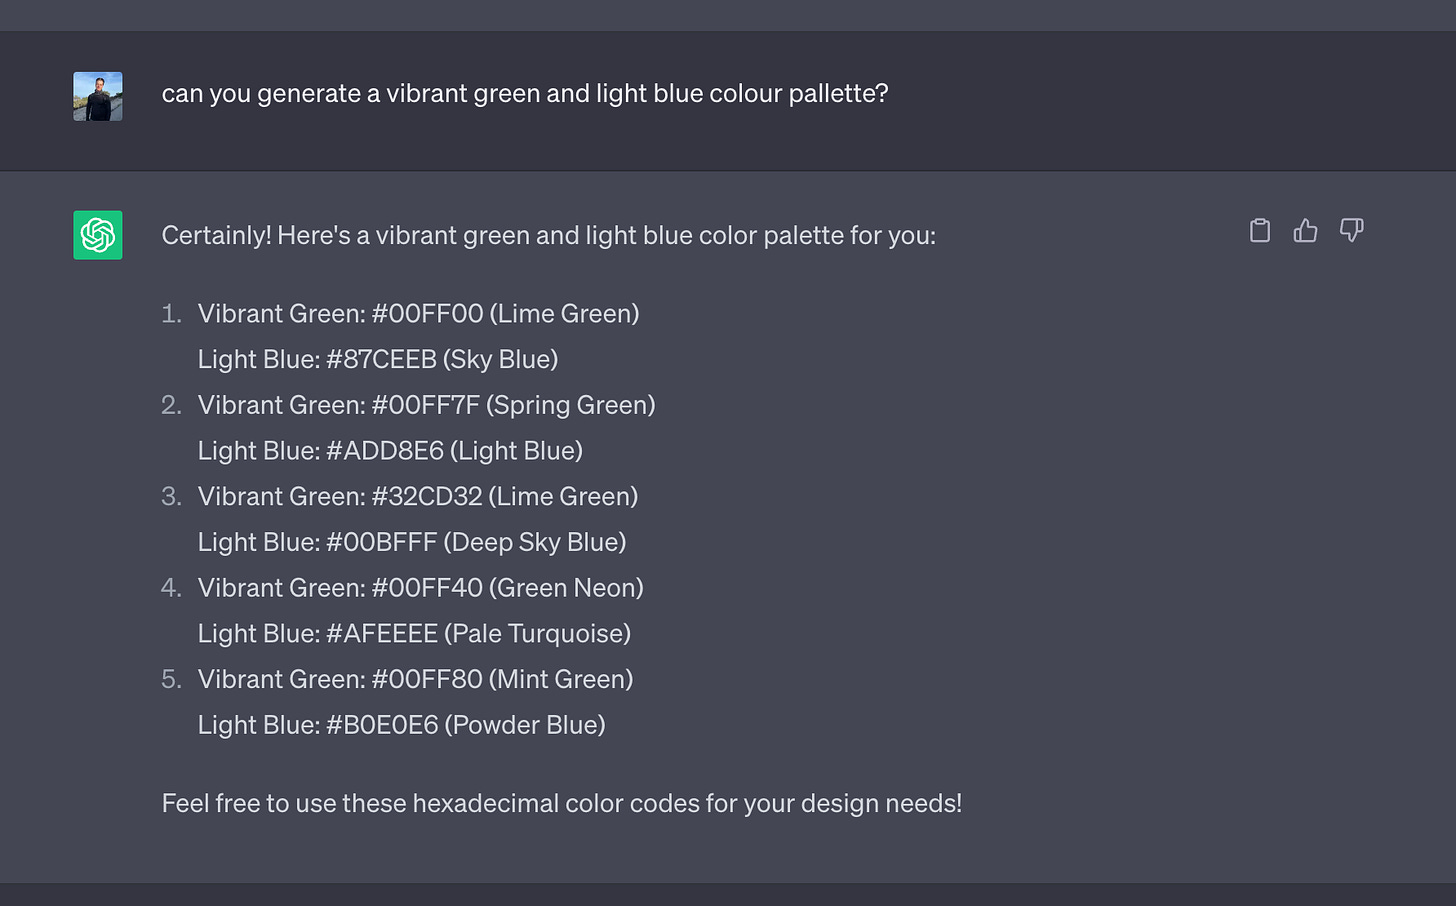 chat-gpt-prompt-for-generating-a-color-palette